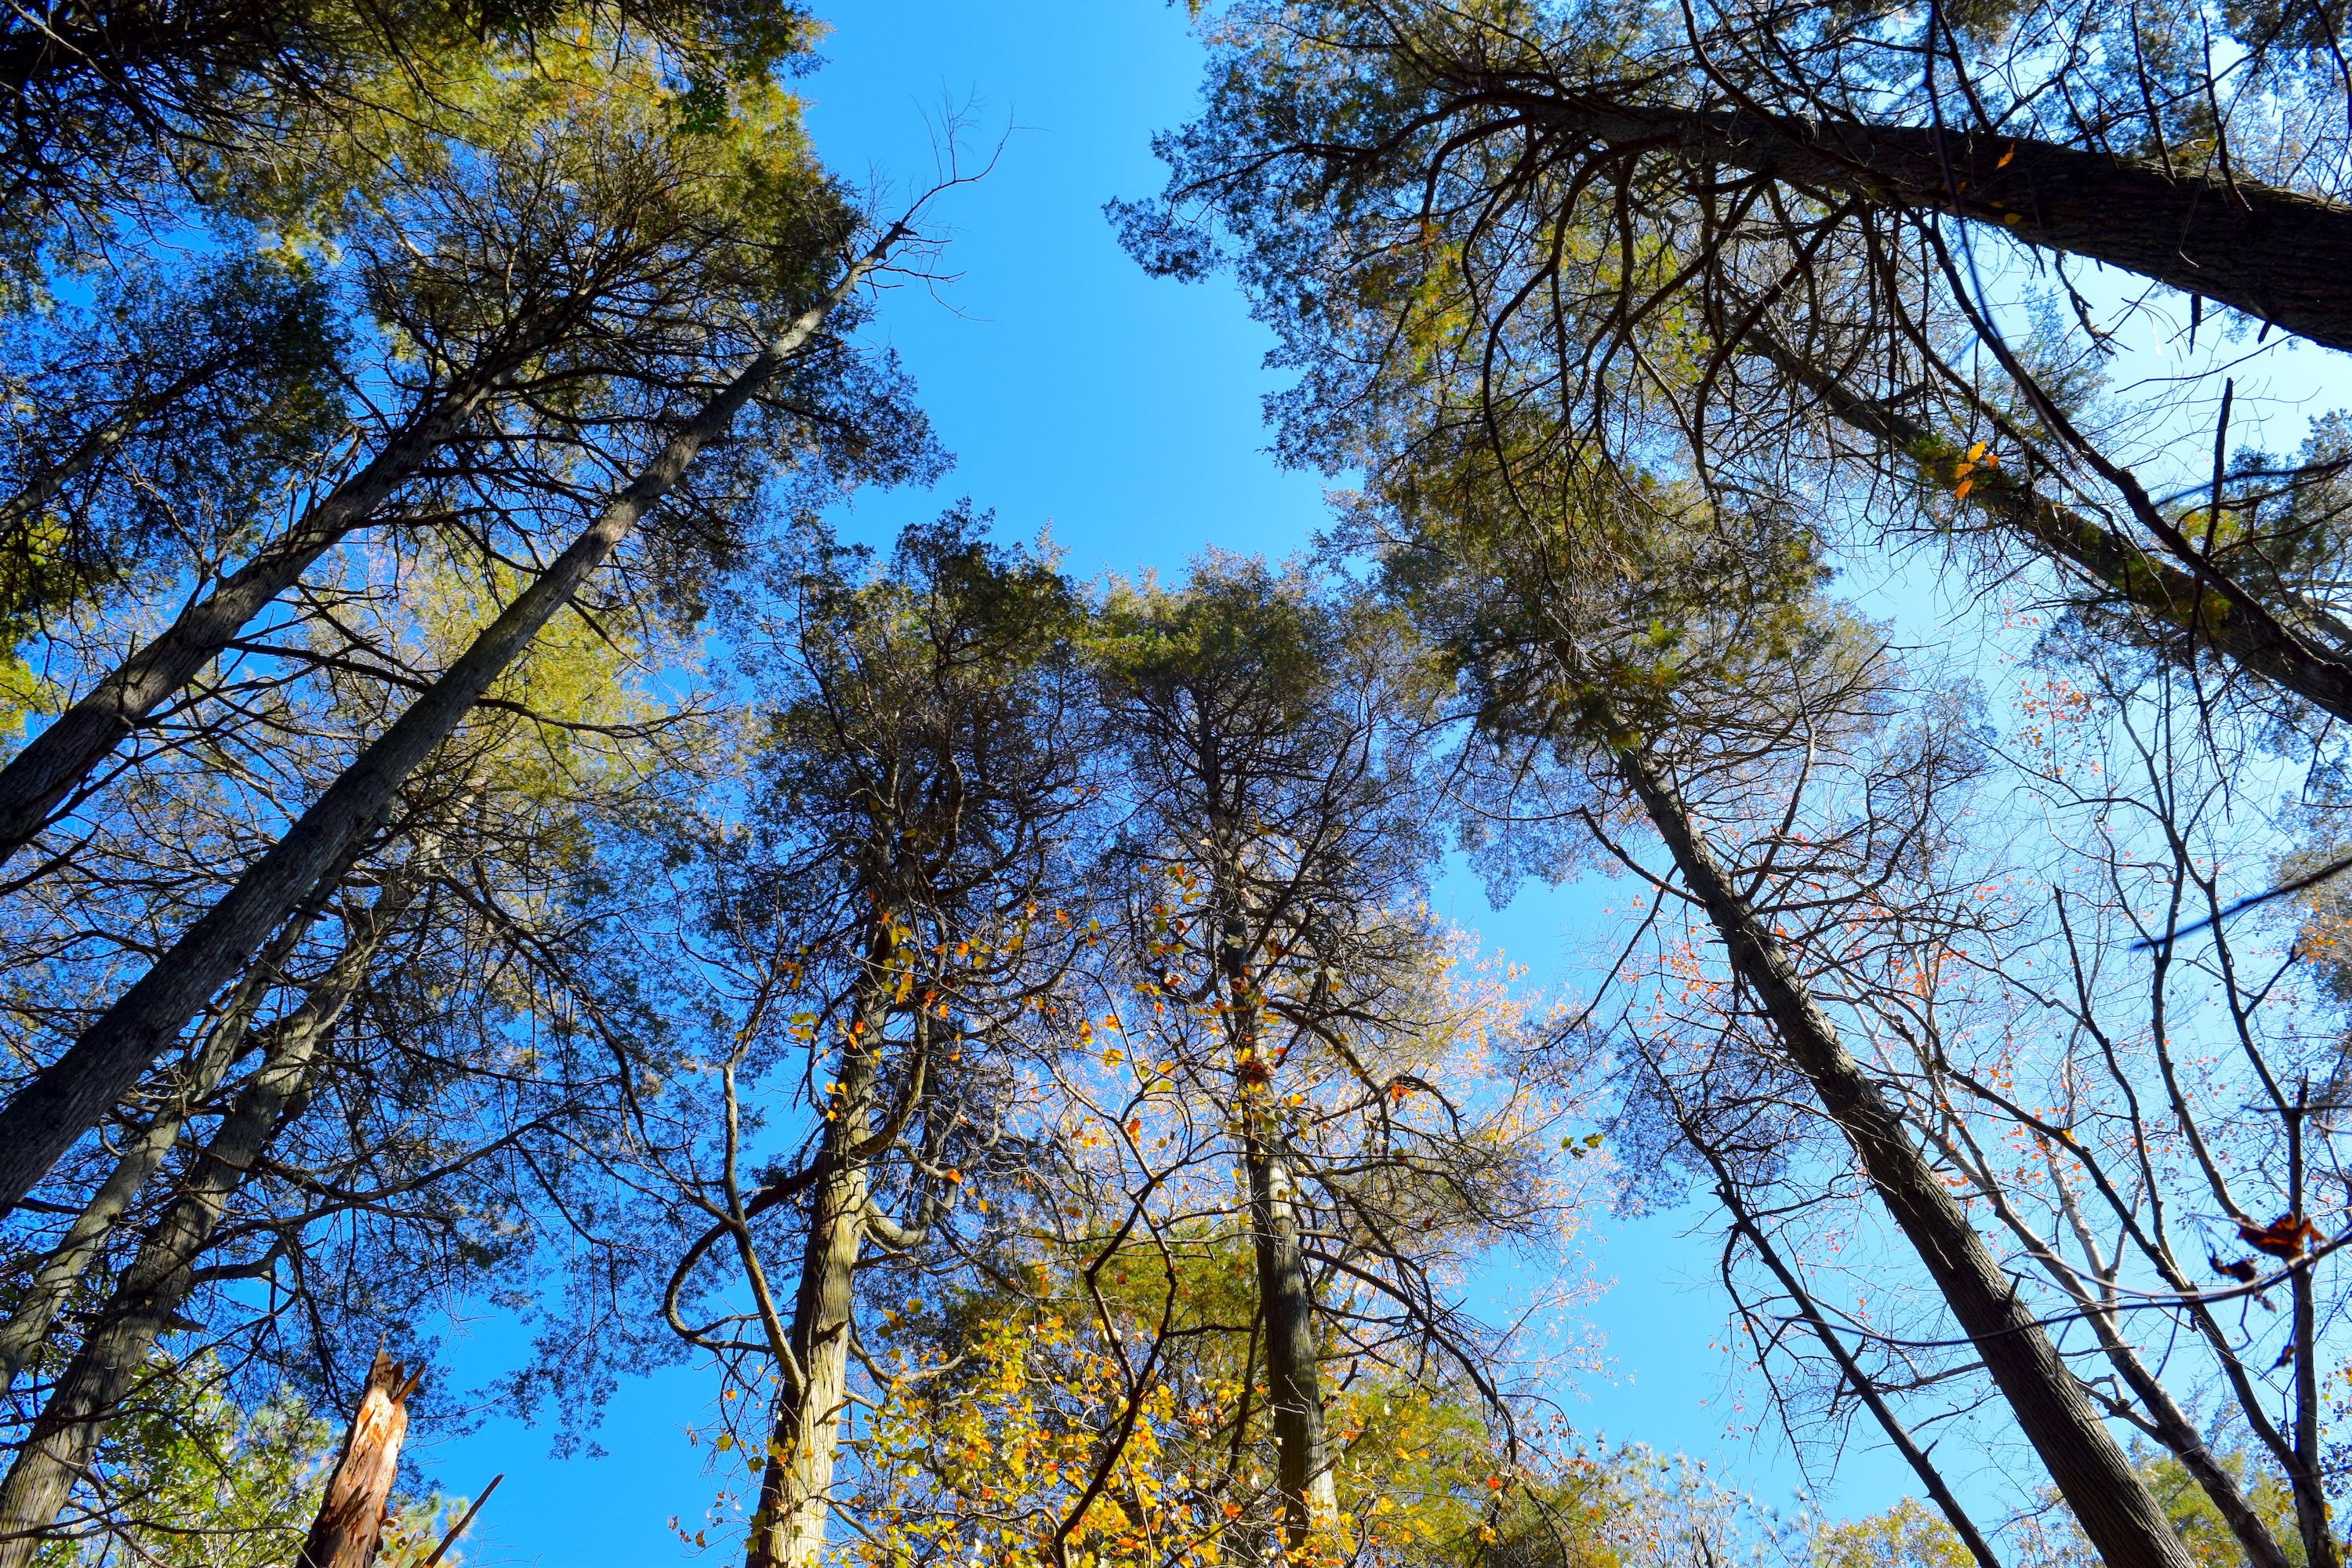 A view from the forest floor toward to sky of several tall pine trees against a bright blue sky.